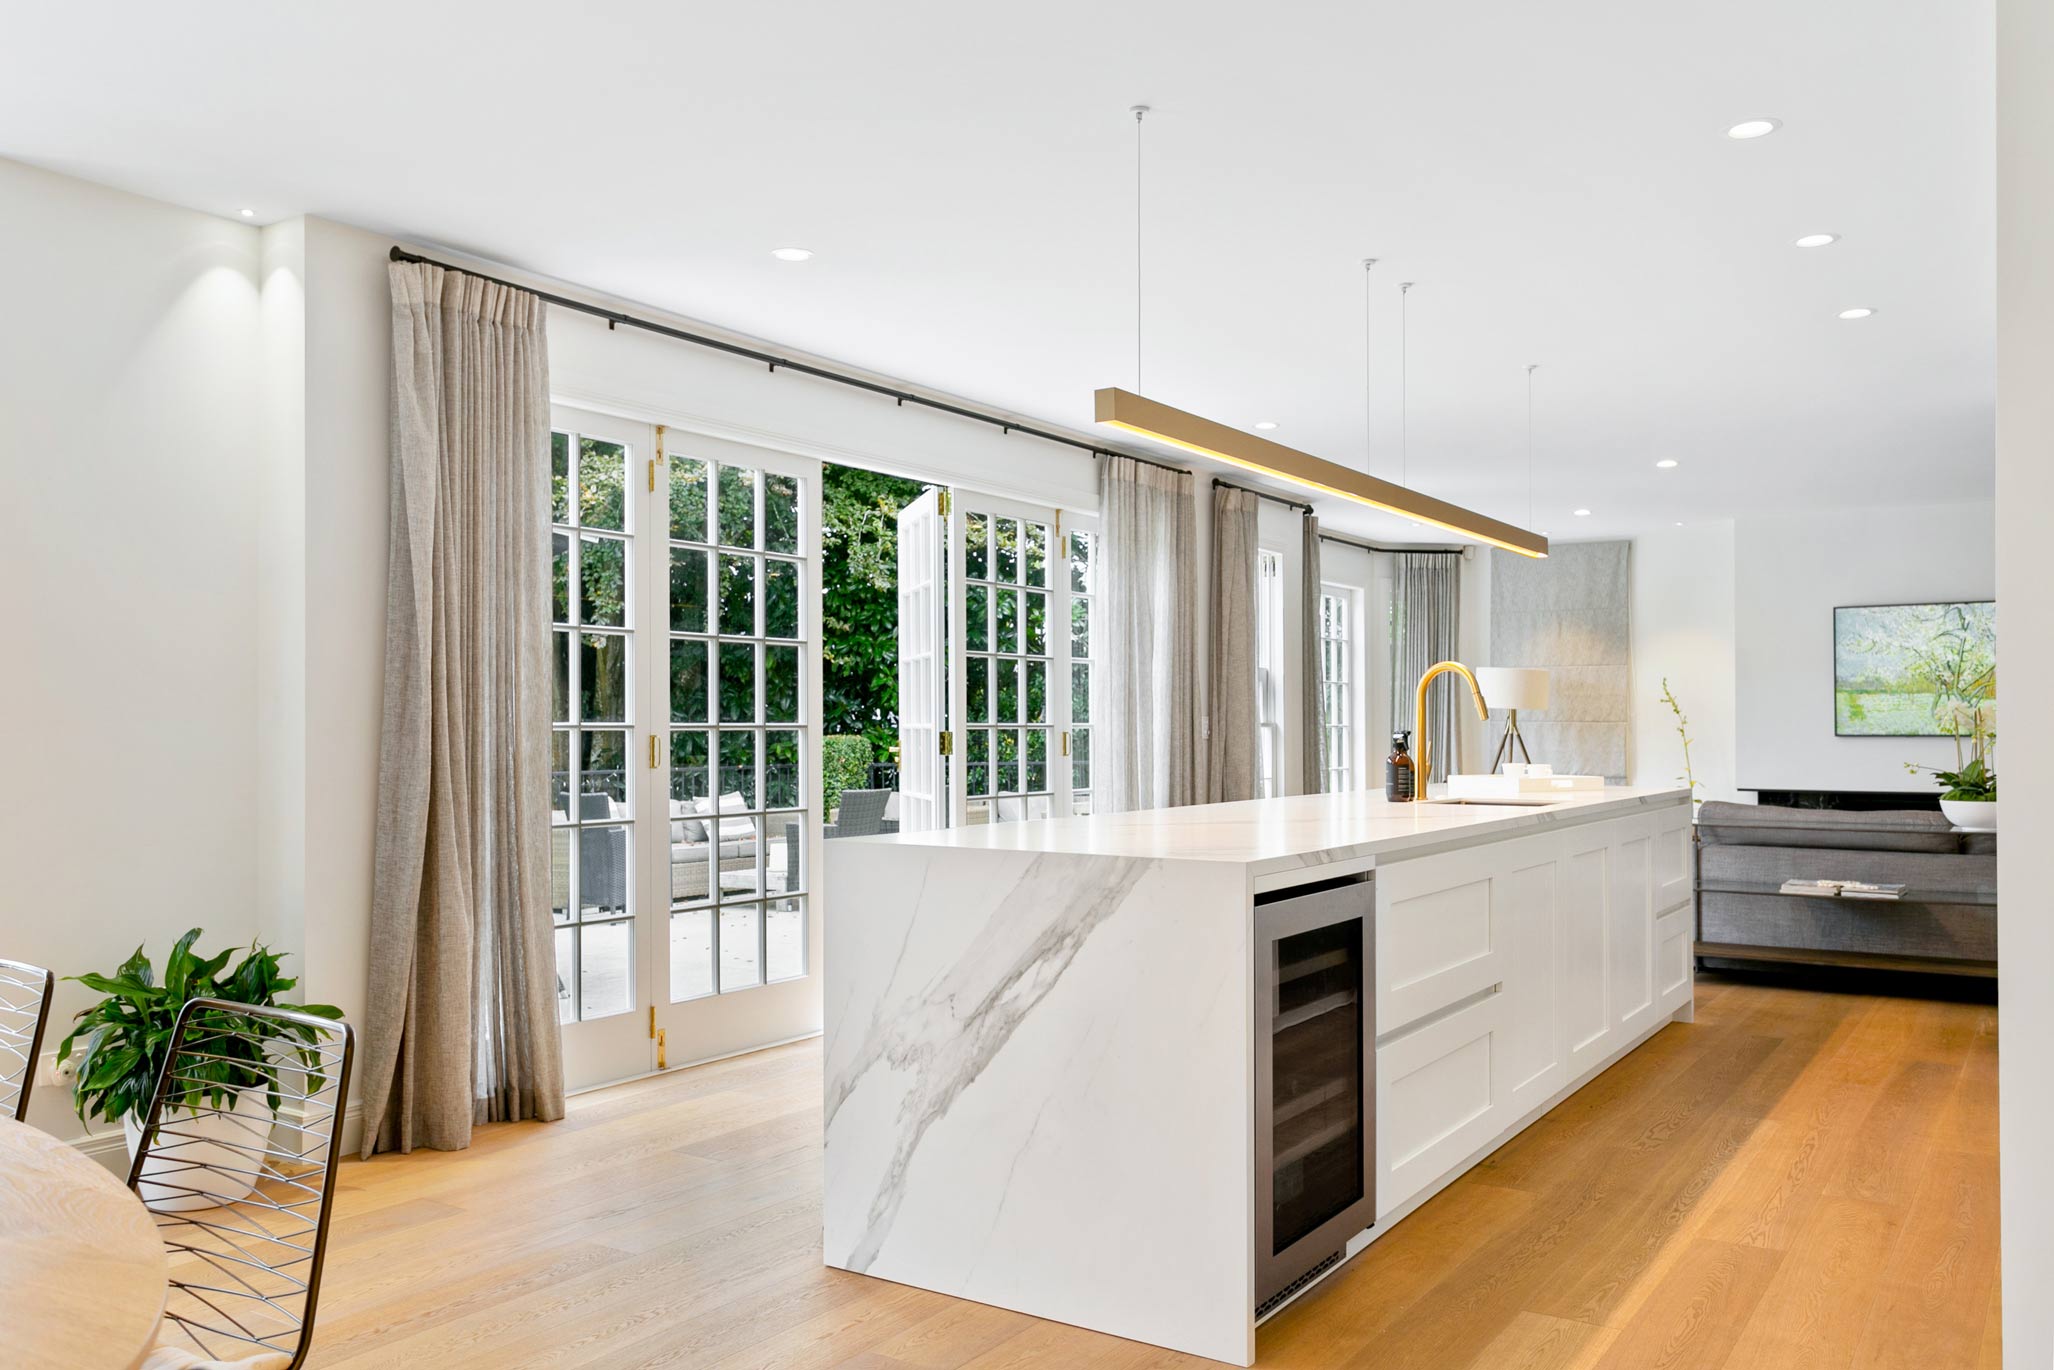 A beautiful Remuera home brought to its former glory